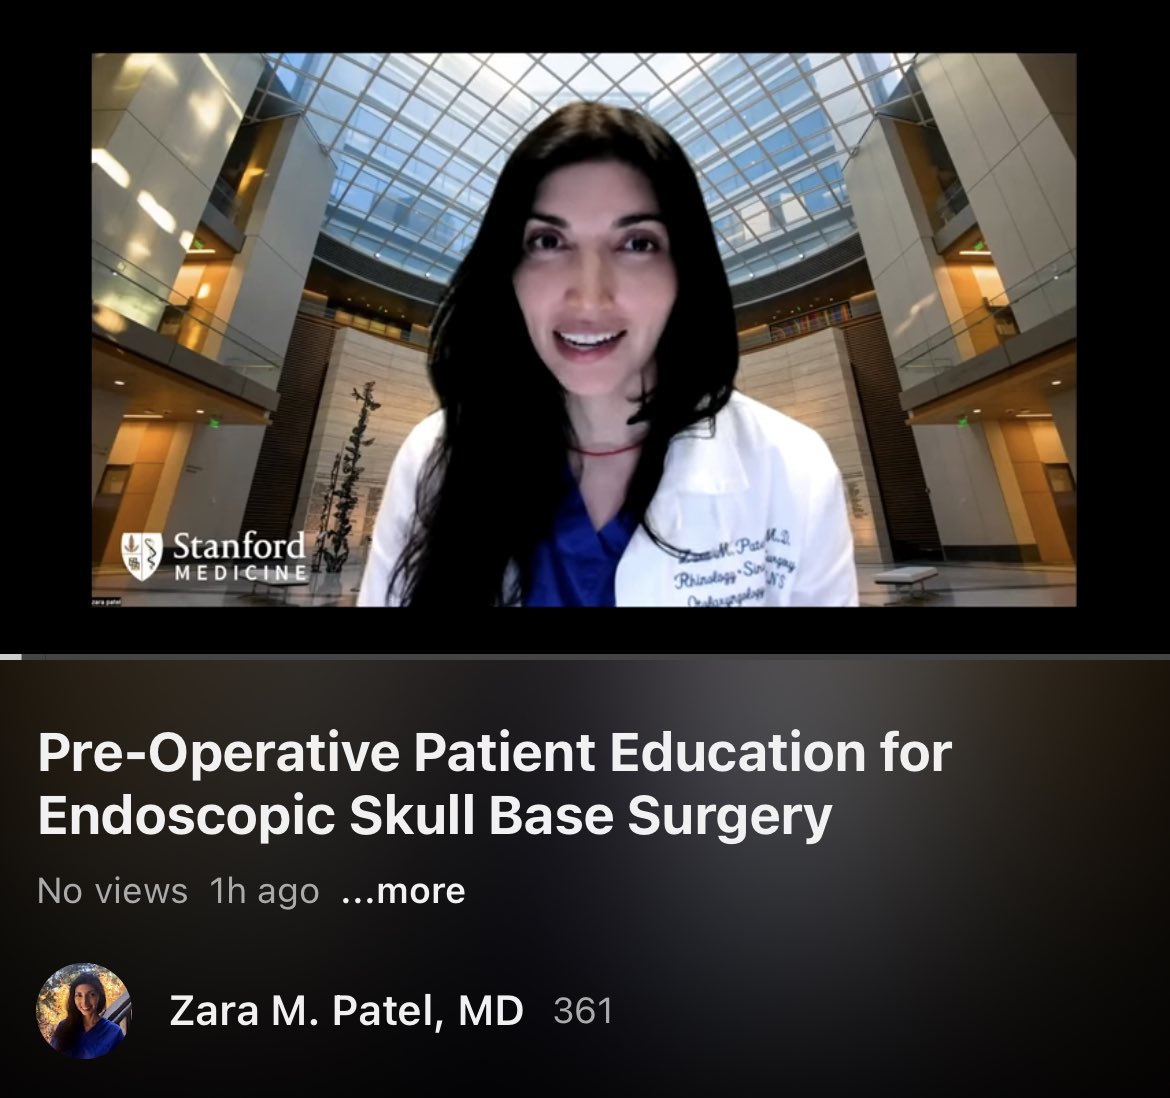 Another Pre-Op Patient Education video is up on my YouTube channel! This time for Endoscopic Skull Base Surgery - from the rhinology perspective! Love operating with our neurosurgeons!
lnkd.in/gWnCe-np

#rhinology #skullbasesurgery #stanfordhealthcare #neurosurgery